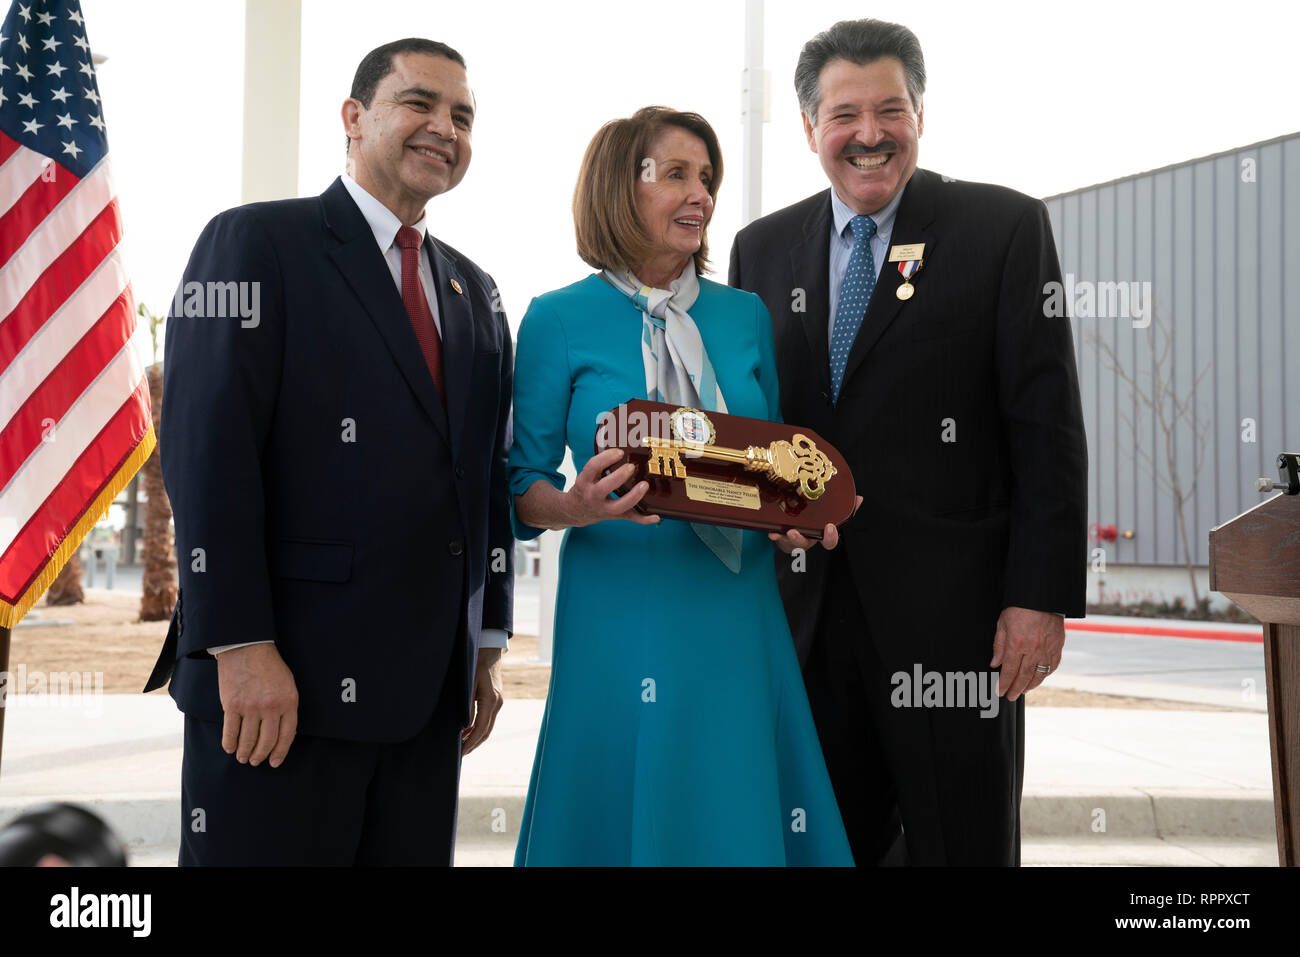 United States House of Representatives Speaker Nancy Pelosi (D-CA), receives a key to the city from Laredo Mayor Pete Saenz, right, and Laredo U.S. Congressman Henry Cuellar during a press conference in Laredo, Texas, after touring the Texas-Mexico border between Laredo and Nuevo Laredo, Tamaulipas, Mexico. Stock Photo